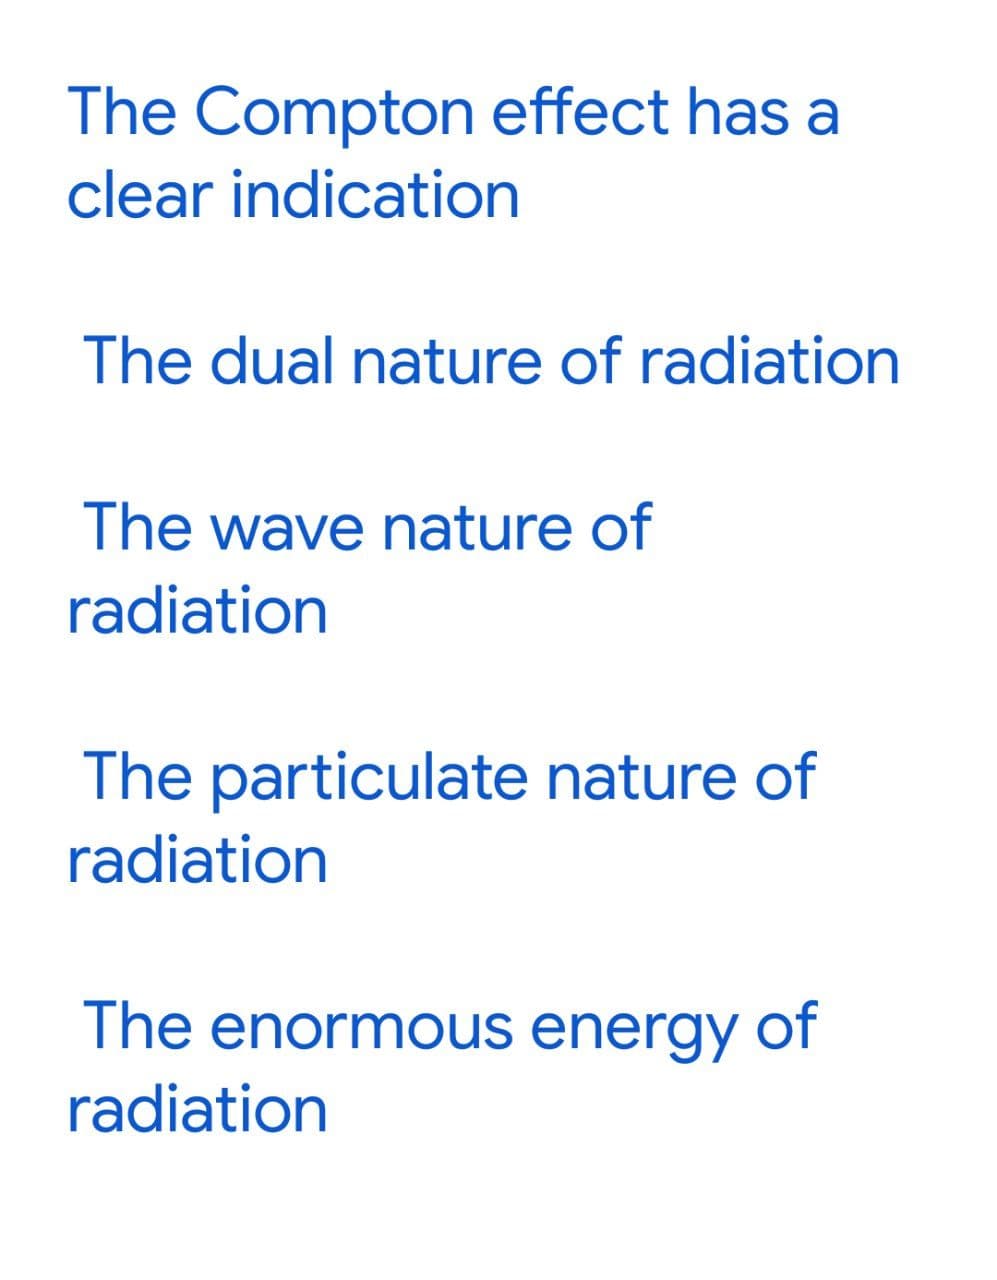 The Compton effect has a
clear indication
The dual nature of radiation
The wave nature of
radiation
The particulate nature of
radiation
The enormous energy of
radiation